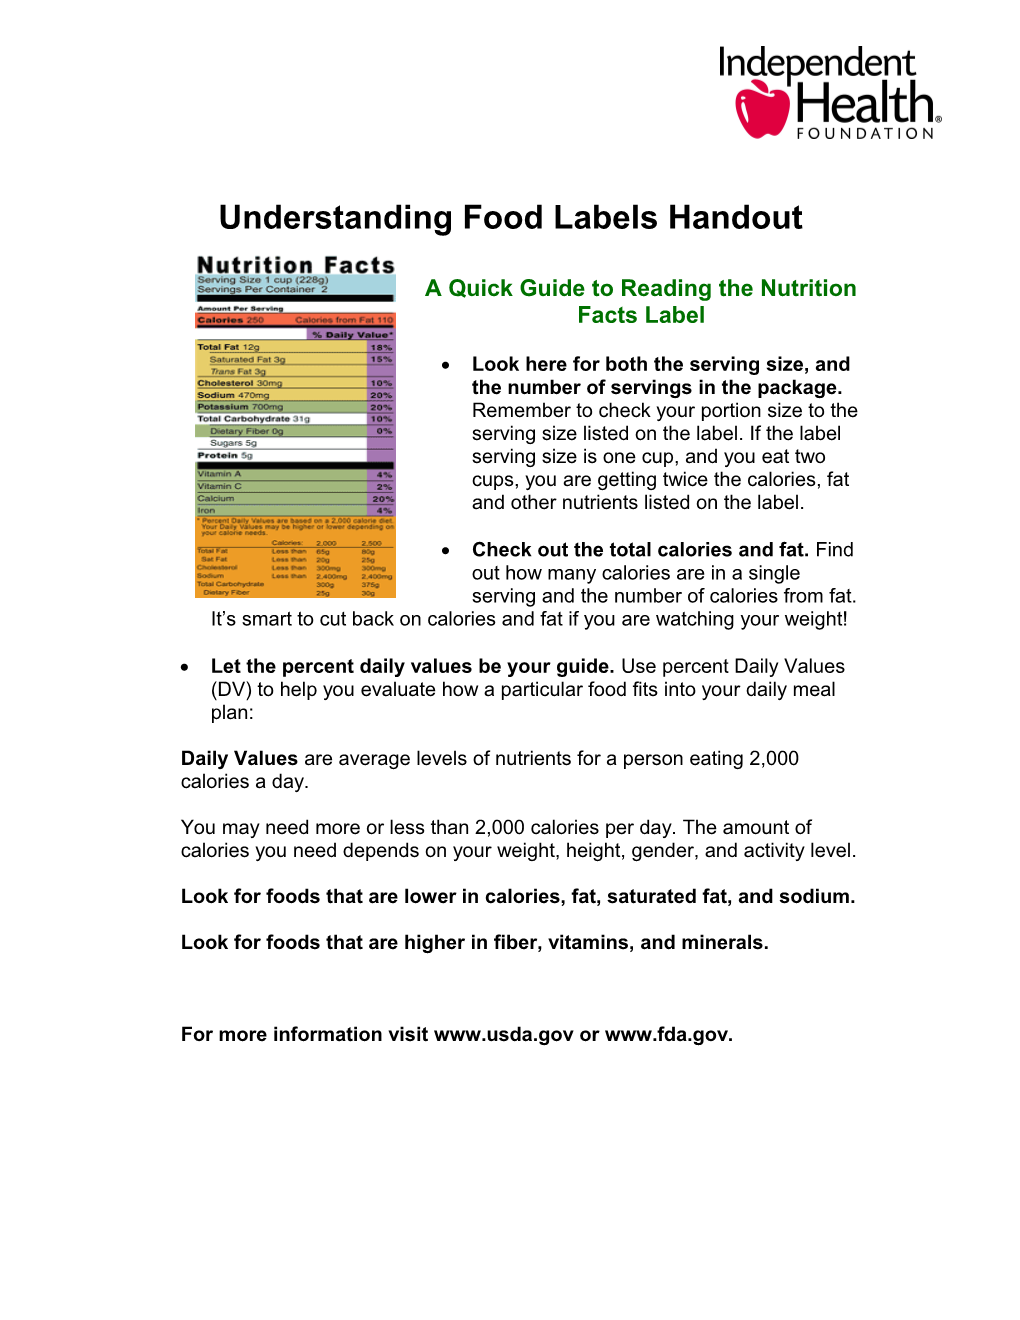 Understanding Nutrition Facts on Food Labels